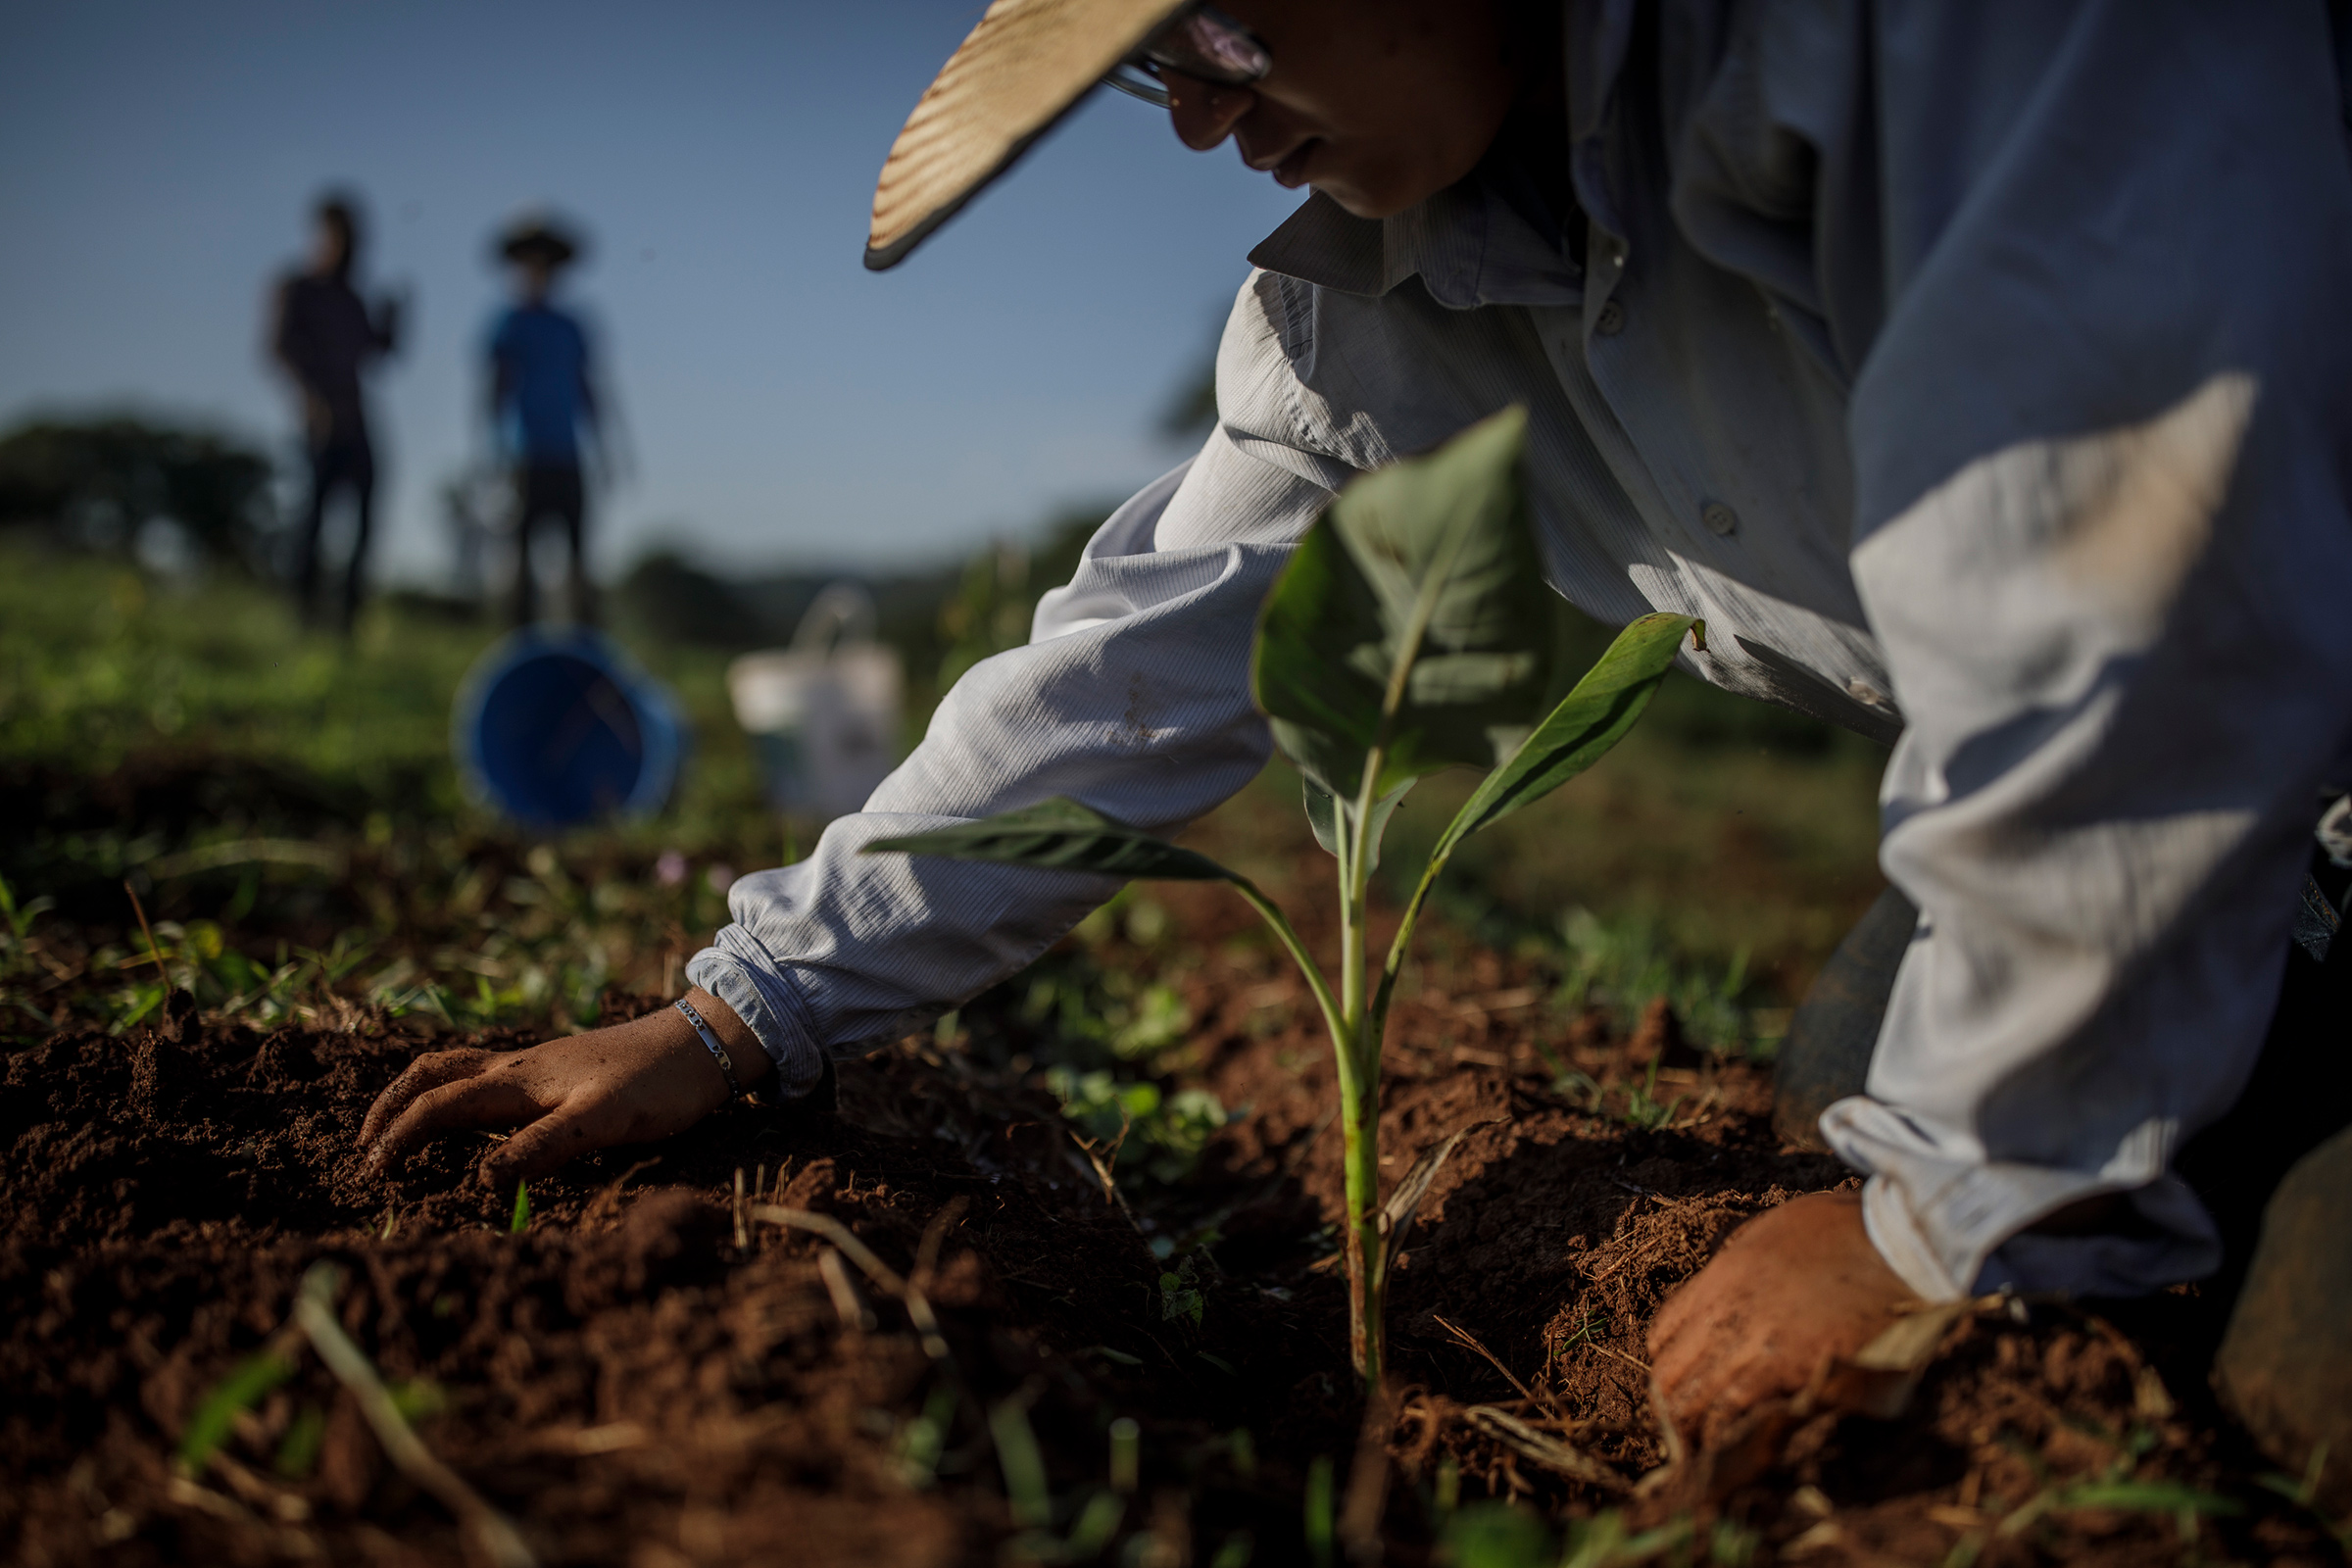 Workers plant tree seedlings in the Preta Terra project. (Victor Moriyama for TIME)